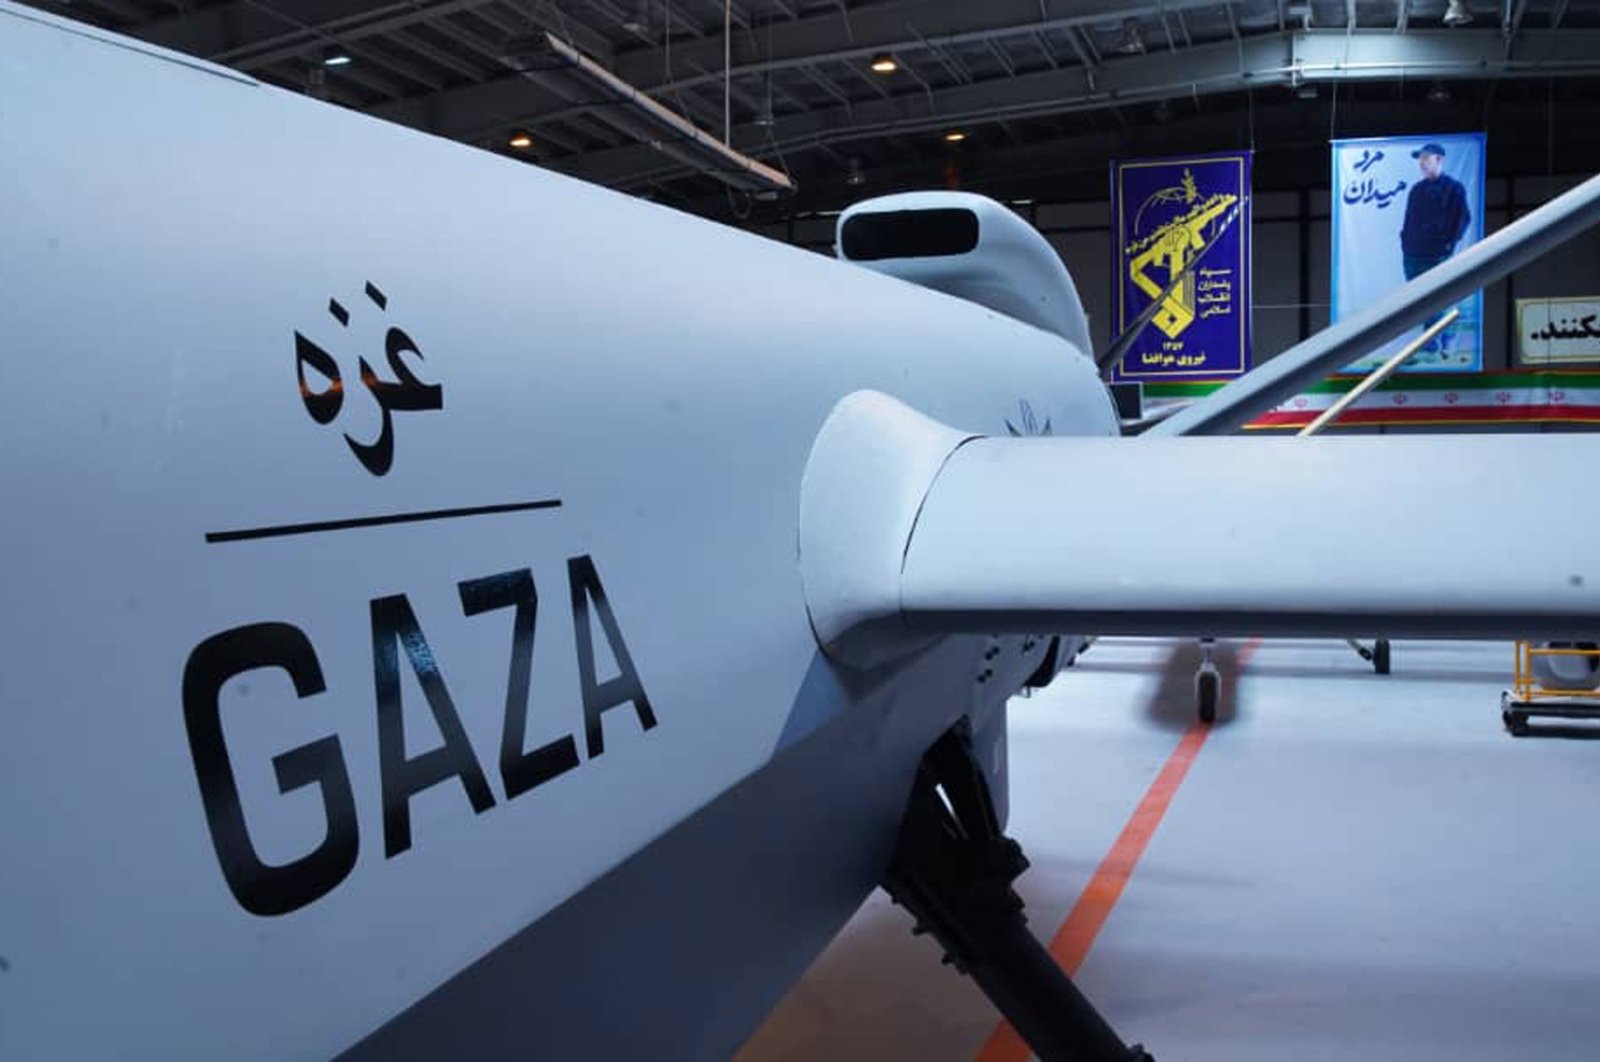 The Guard's new drone called "Gaza" is displayed in an undisclosed location in Iran, May 22, 2021. (Sepahnews via AP)